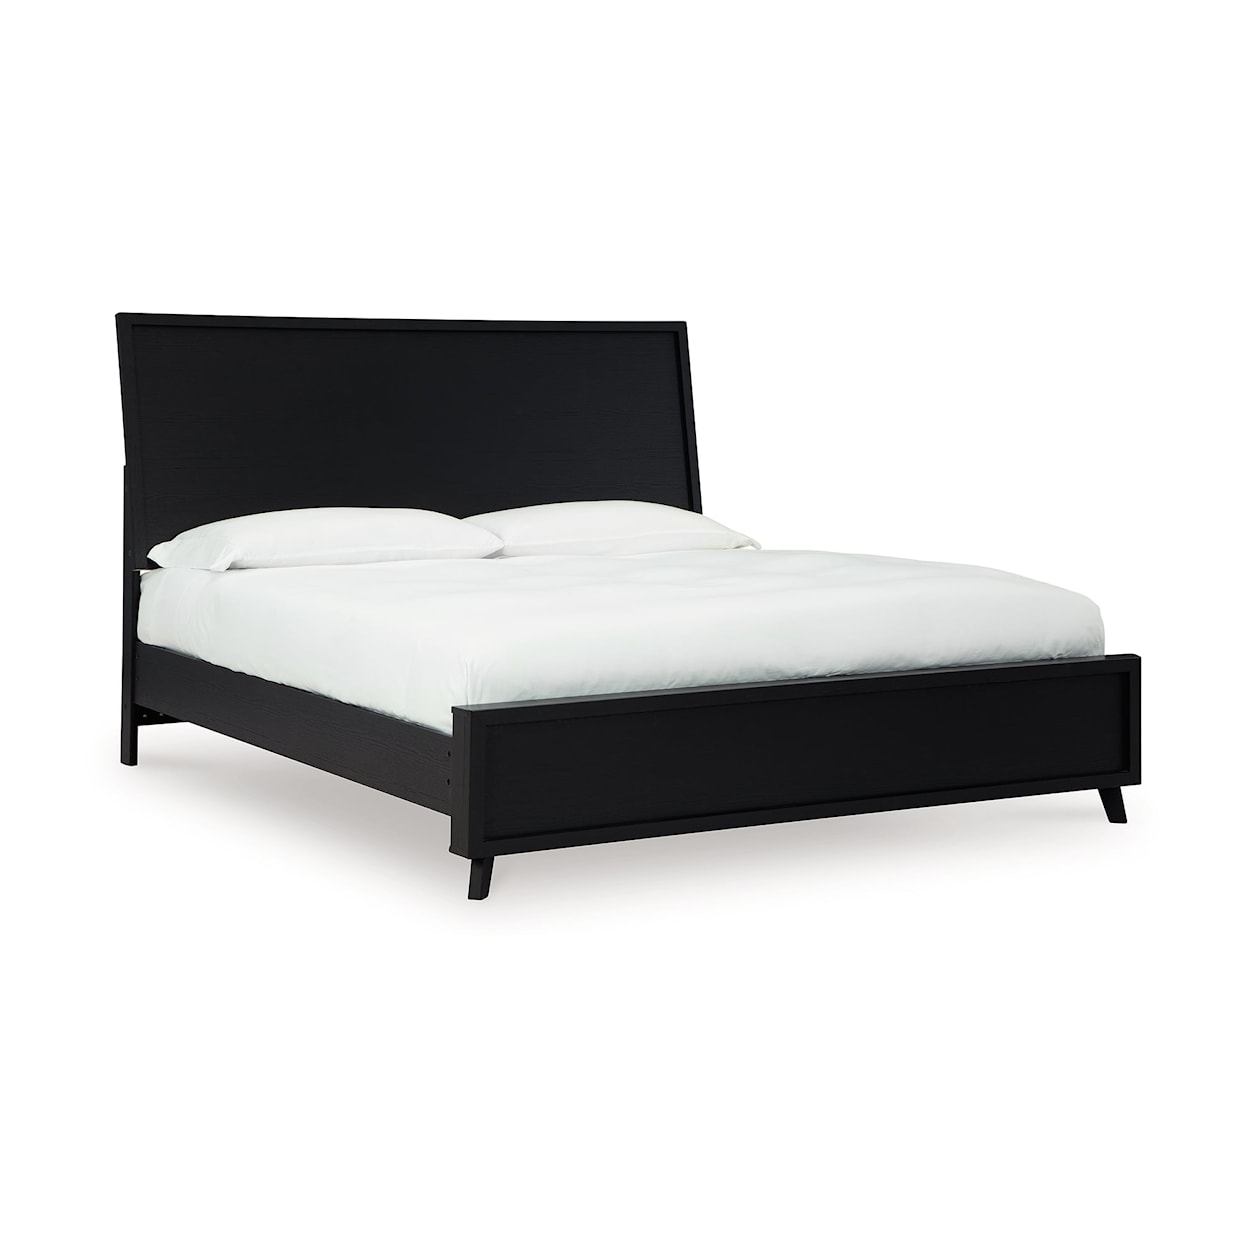 Signature Design by Ashley Danziar King Panel Bed